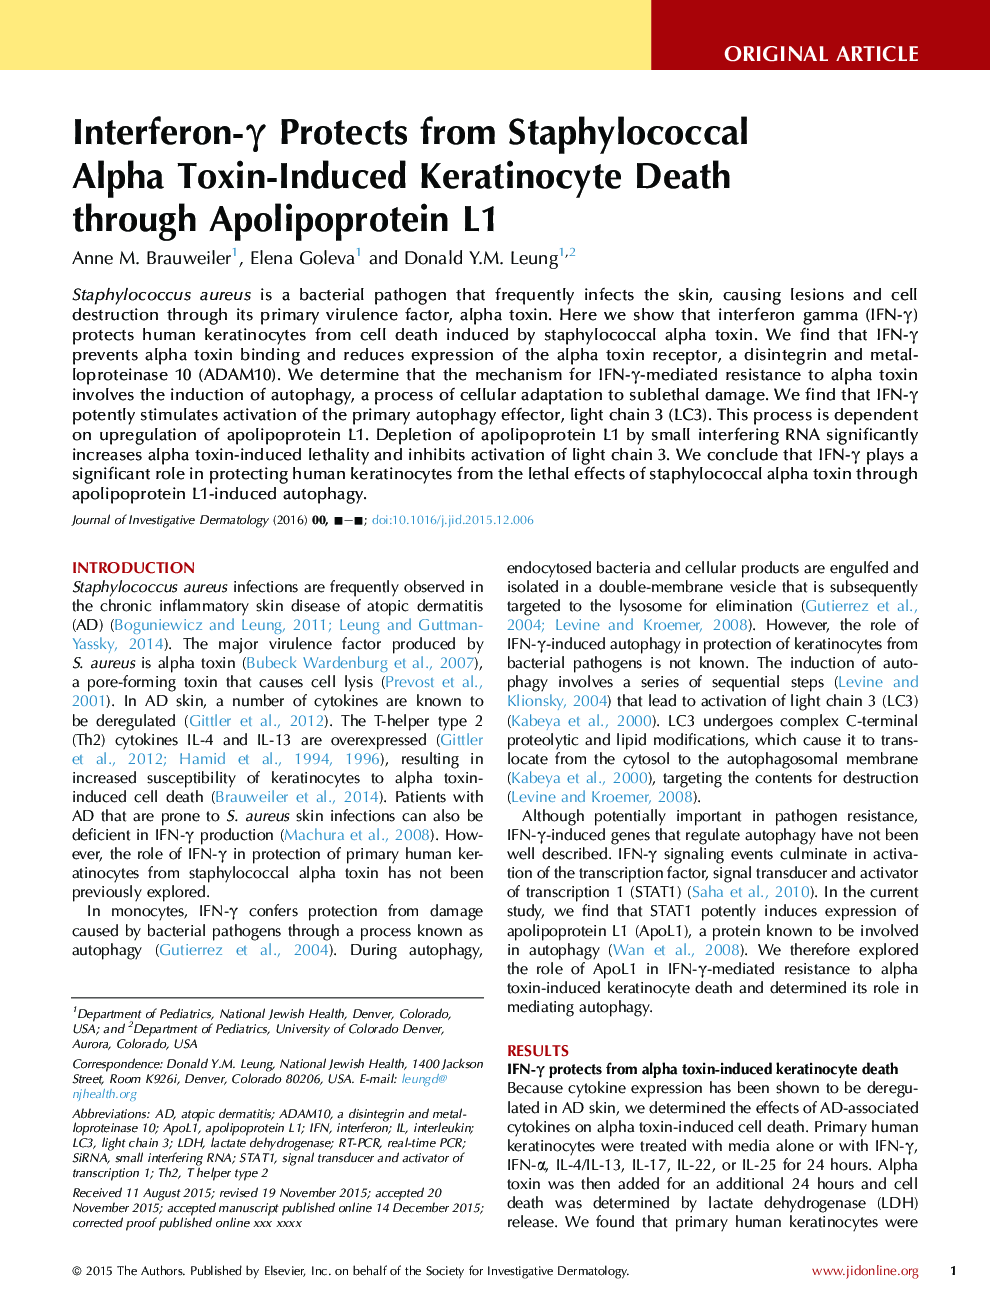 Interferon-Î³ Protects from Staphylococcal Alpha Toxin-Induced Keratinocyte Death through Apolipoprotein L1